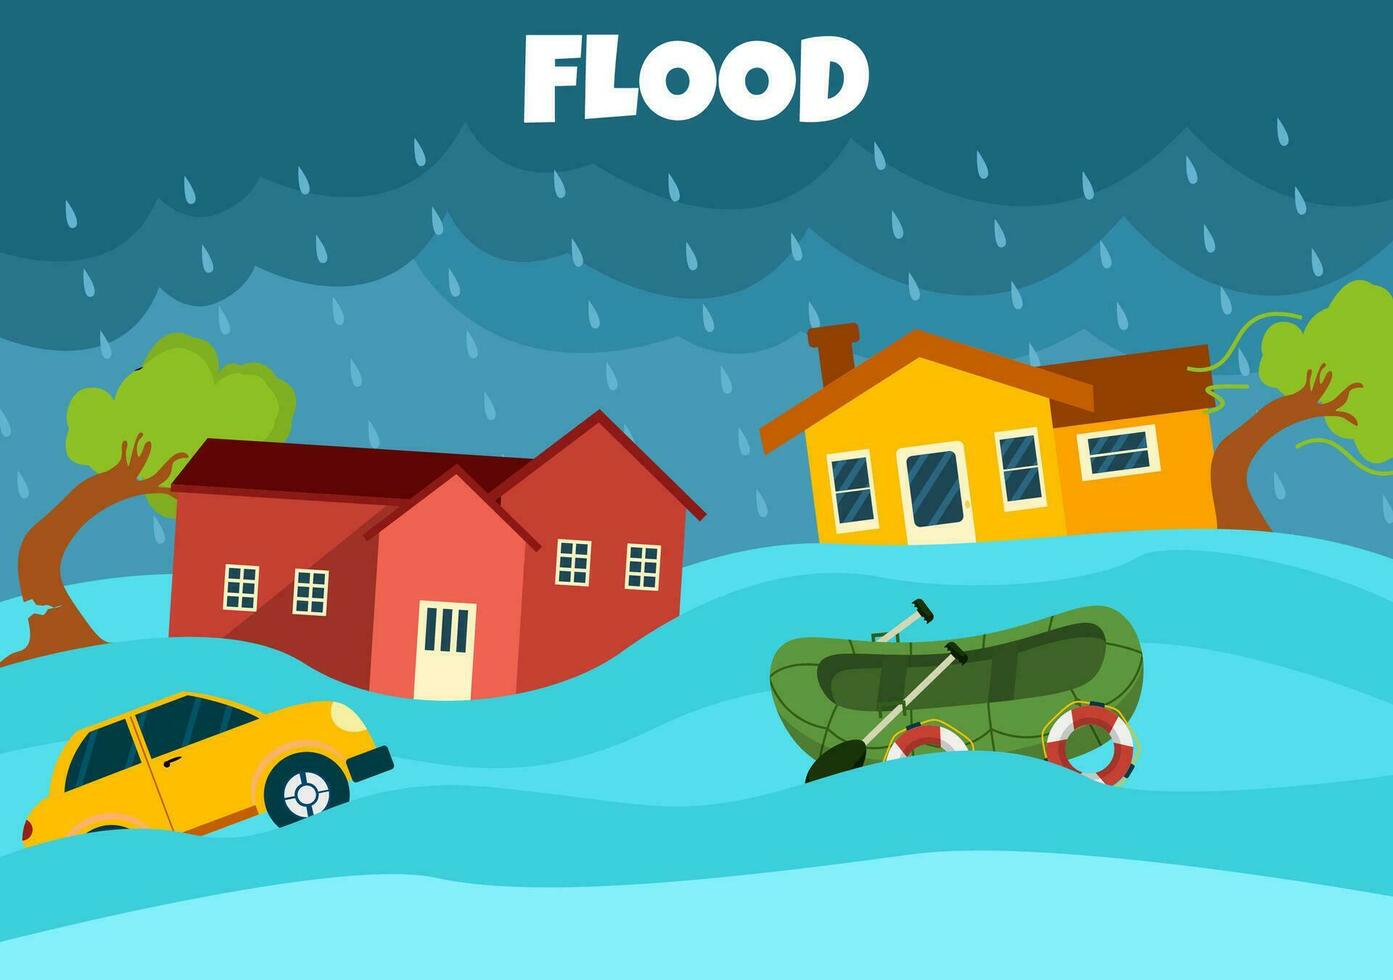 Floods Vector Illustration of The Storm Wreaked Havoc and Flooded the City with Houses and Cars Sinking in Flat Cartoon Background Templates